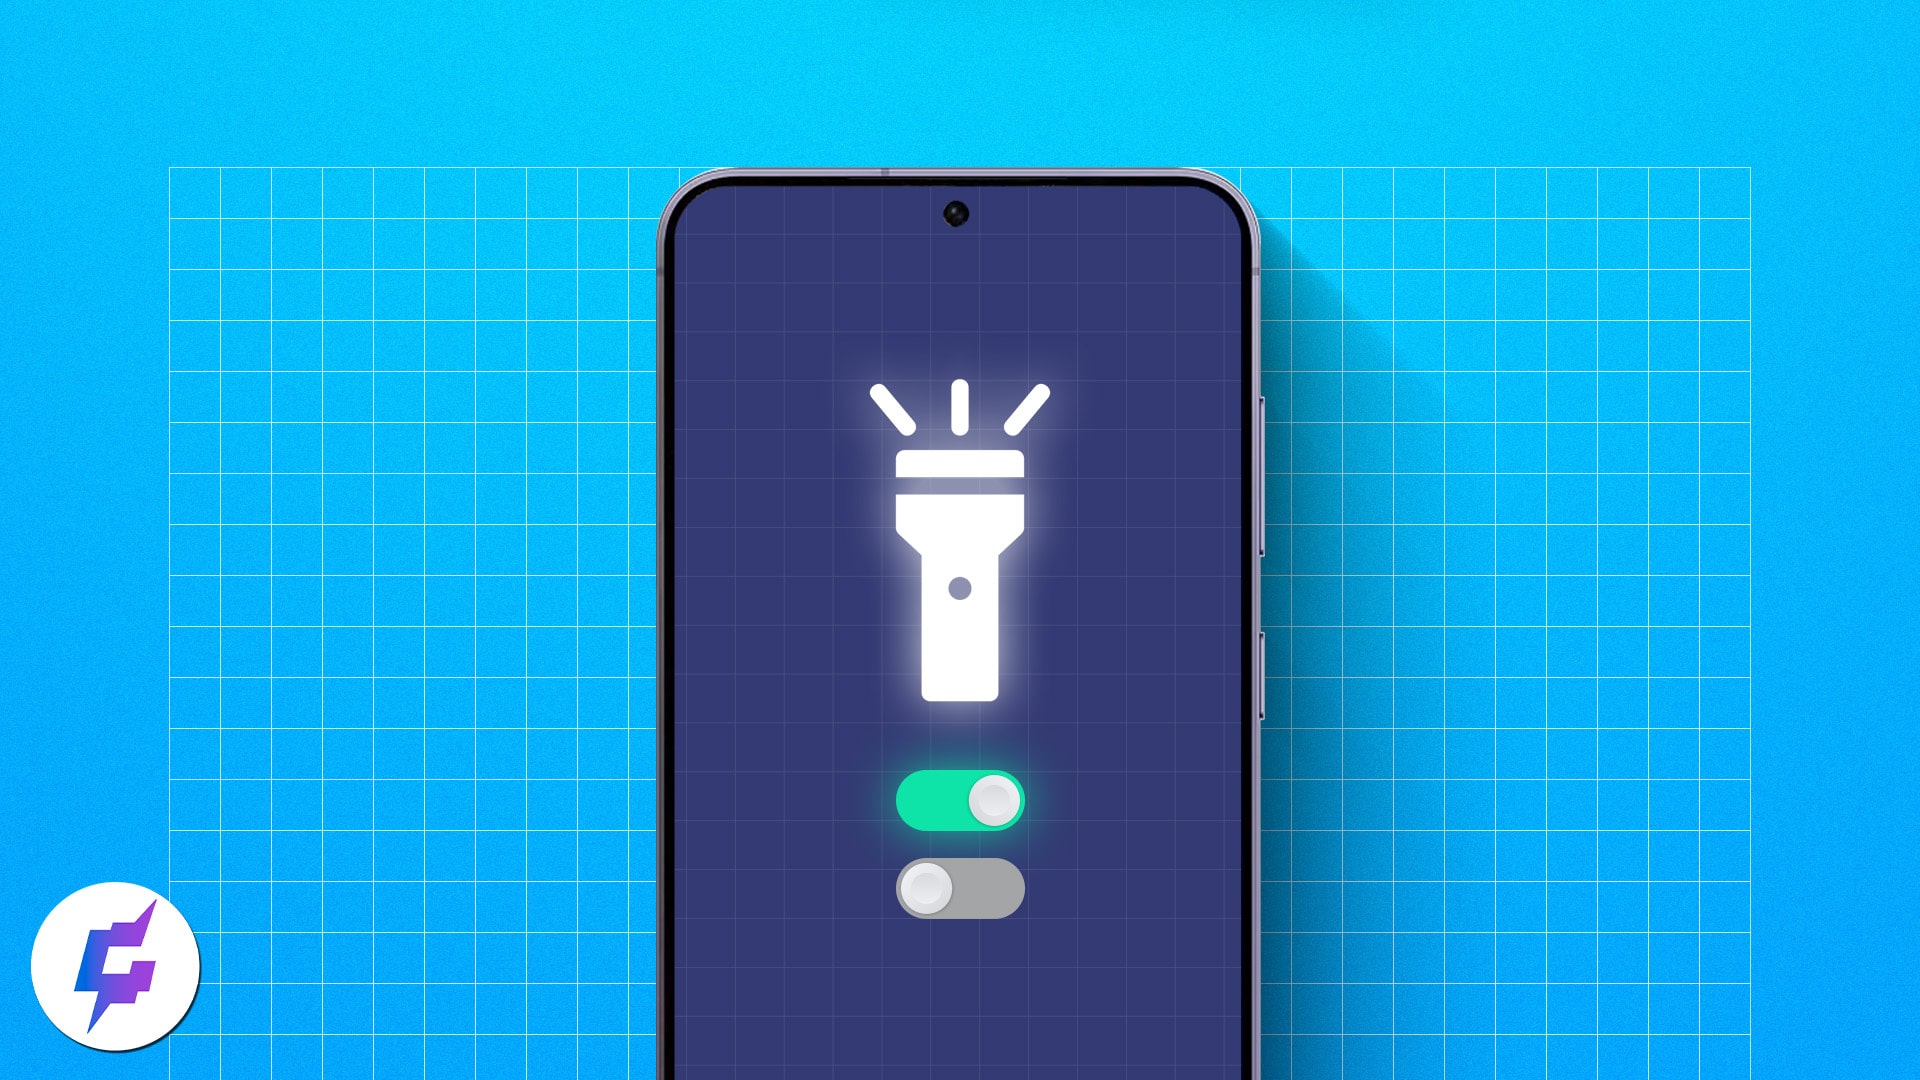 How to turn flashlight on or off on Android